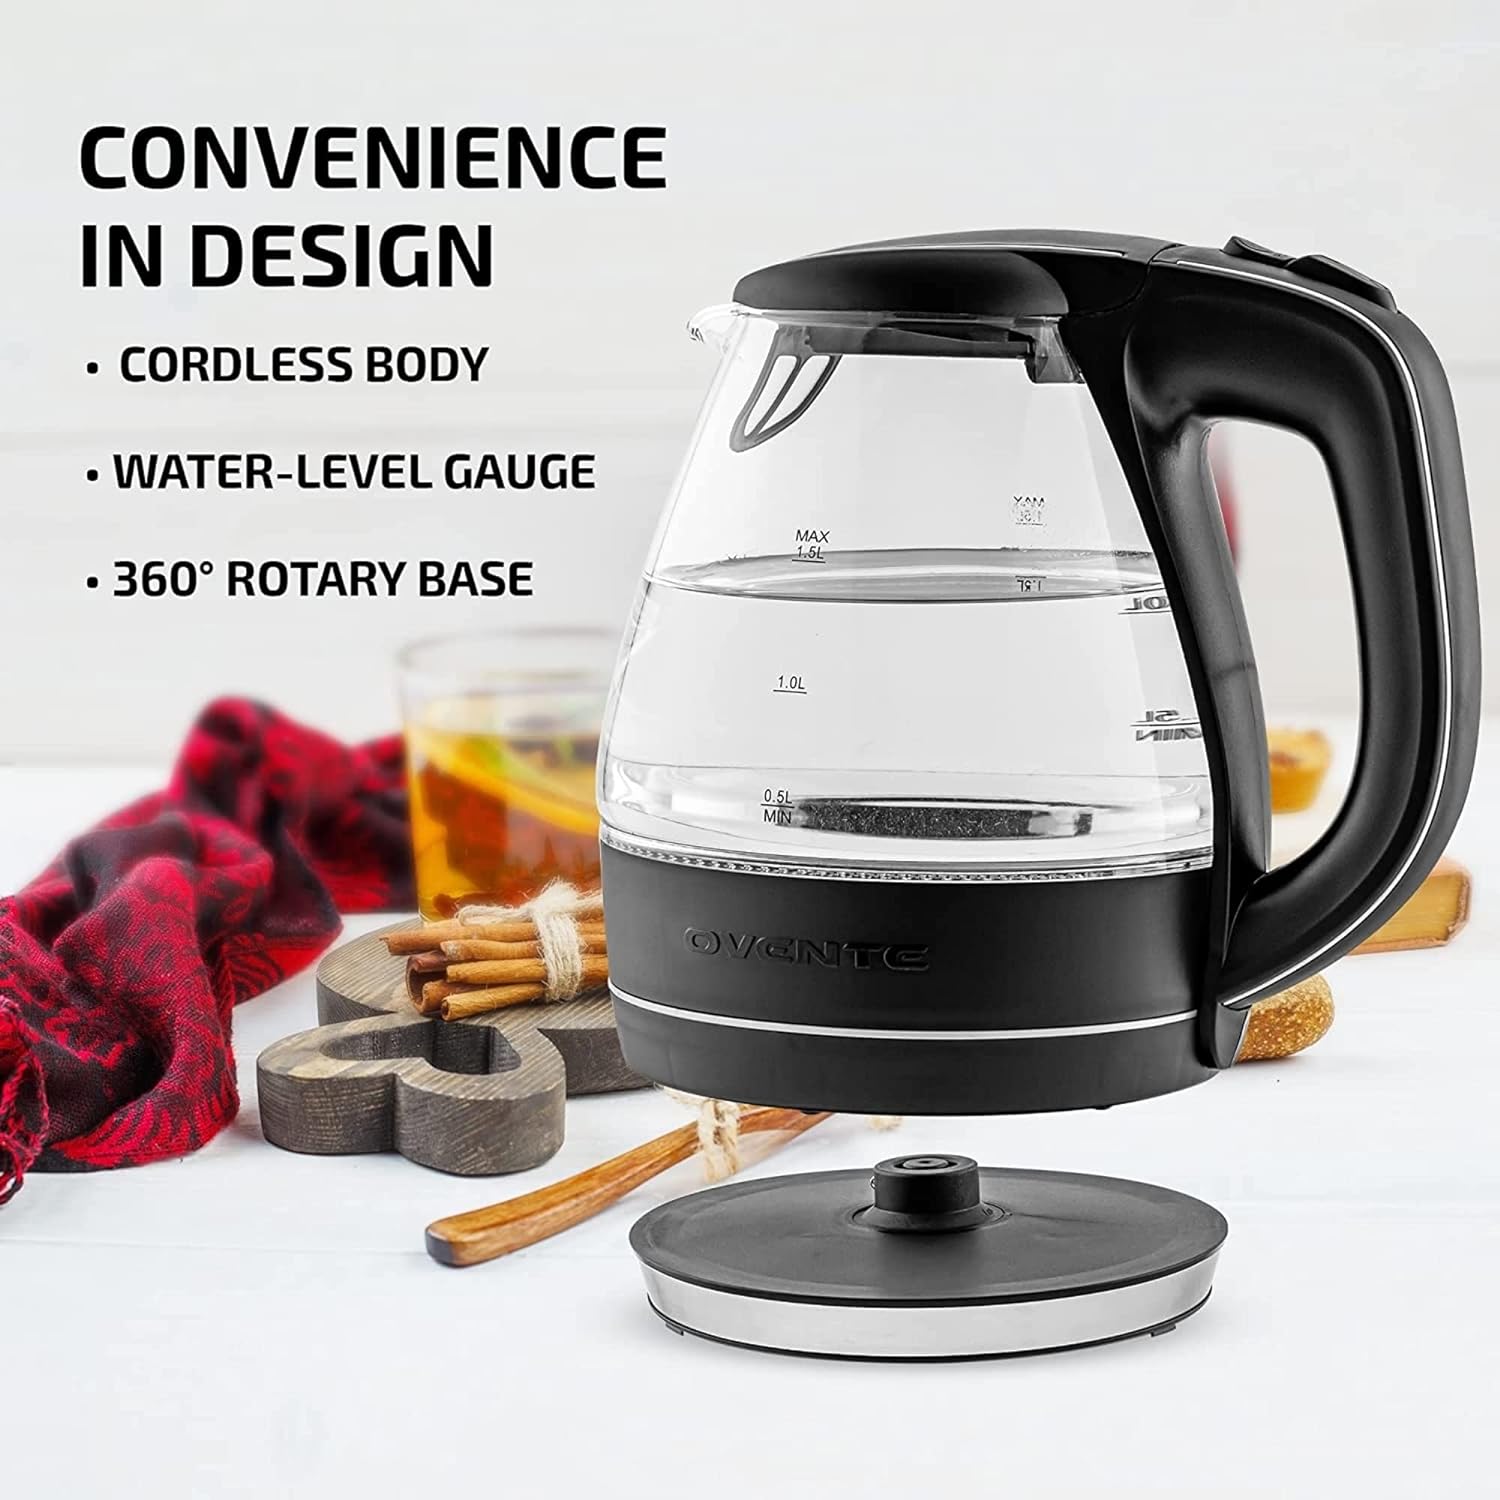 5 best electric tea kettles with temperature control in 2024